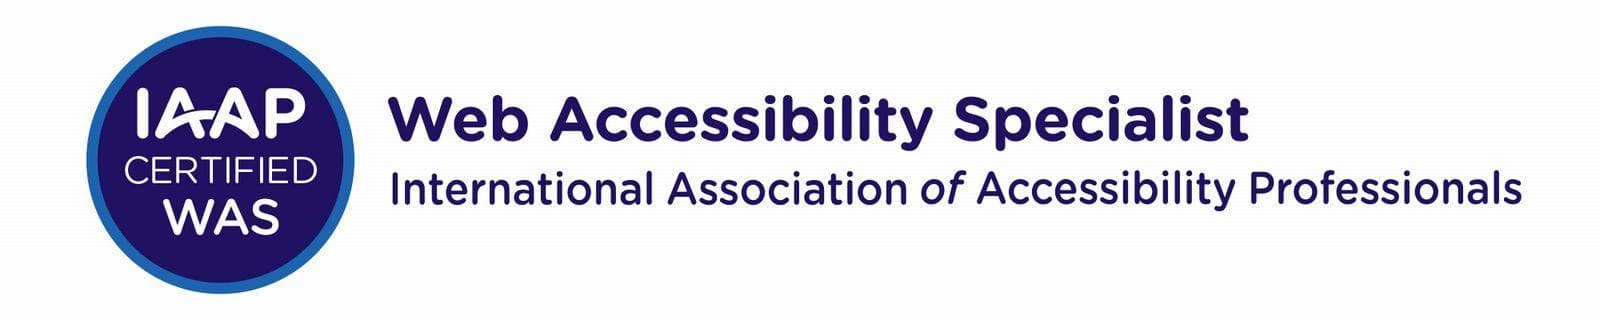 Web Accessibility Specialist - International Association of Accessibility Professionals